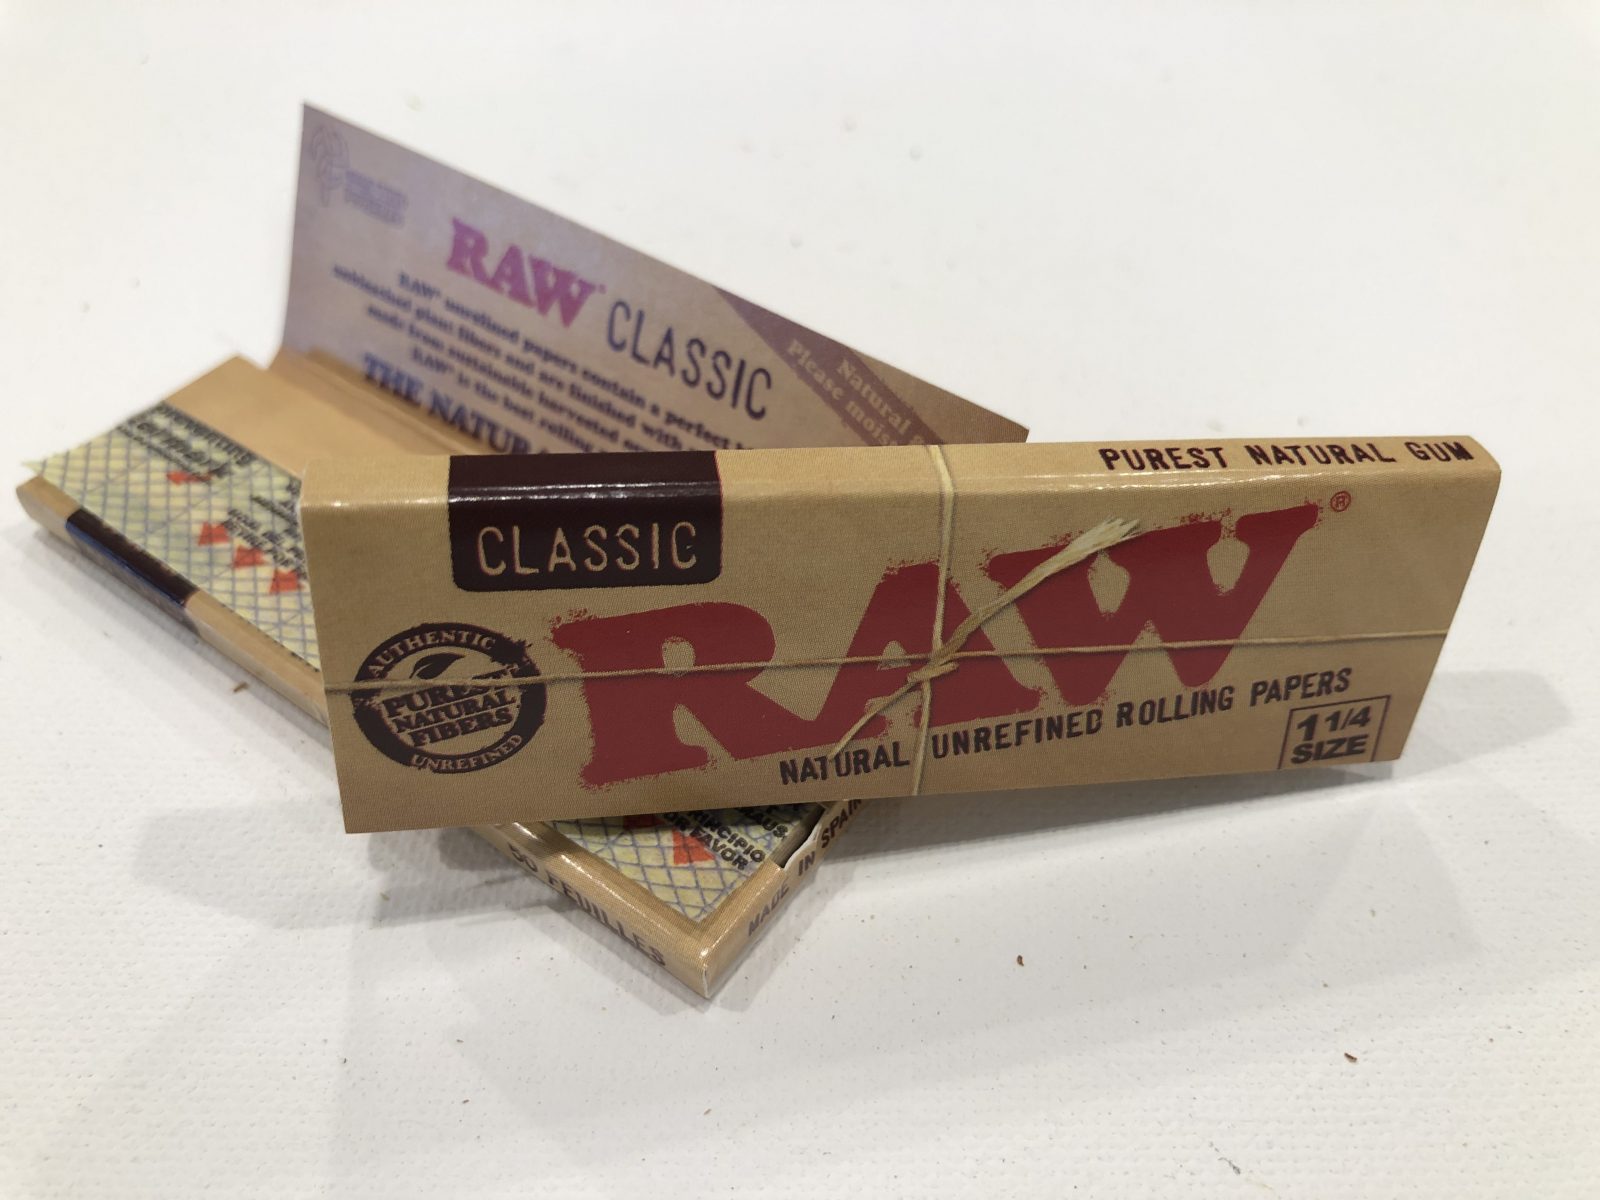 Buy Instant Raw 1 1/4 Classic Rolling Papers at Calgary Cannabis Delivery, Online Order Raw 1 1/4 Classic Rolling Papers at Calgary Weed Delivery, Raw 1 1/4 Classic Rolling Papers Order Now at Calgary Delivery, Raw 1 1/4 Classic Rolling Papers Weed Buying at Calgary Weed Dispensary, Raw 1 1/4 Classic Rolling Papers Cannabis ordering at Calgary Delivery.